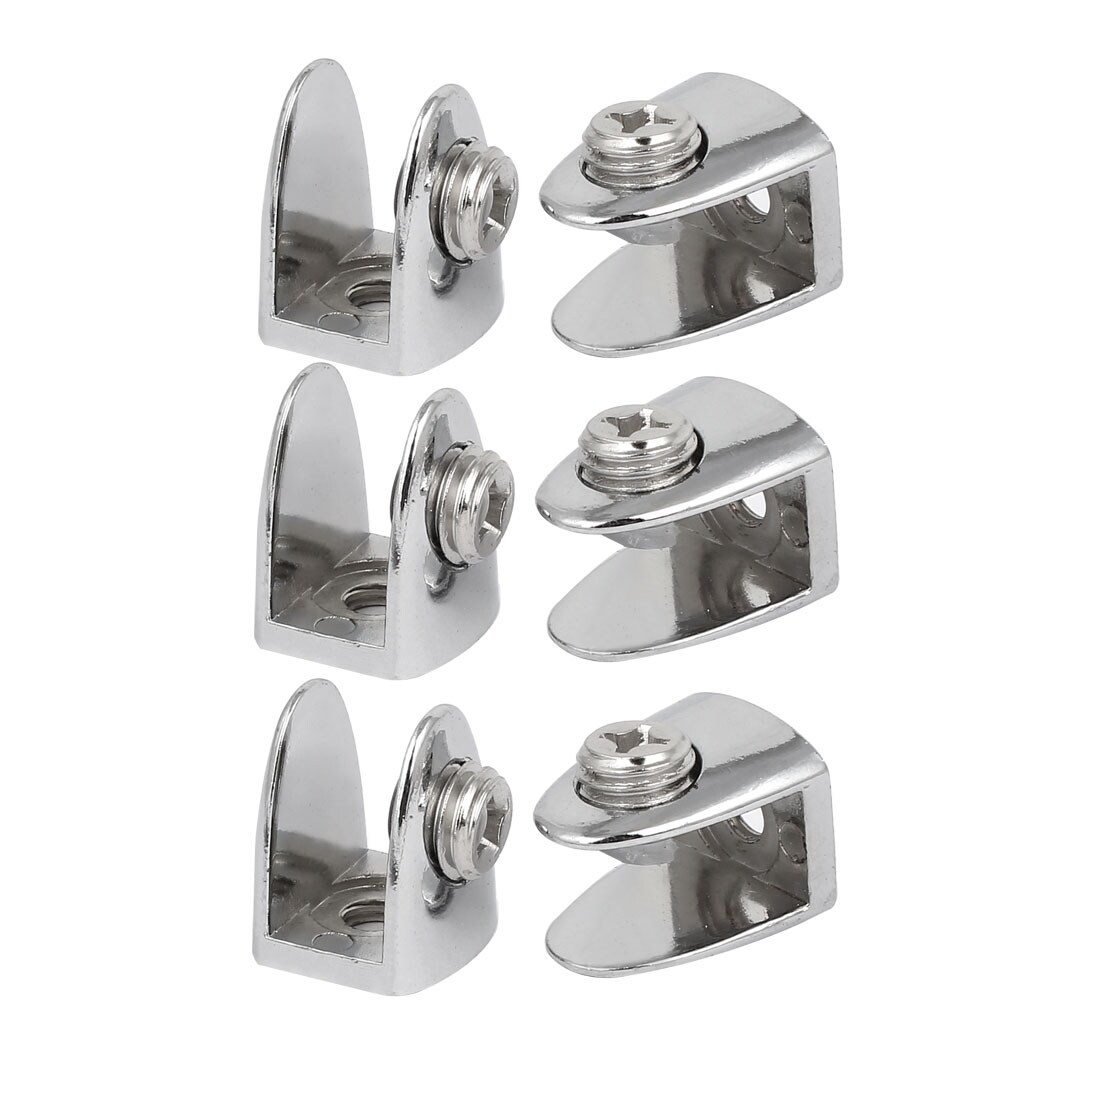 Glass Shelf Clamp Clip Bracket Semicircle Wall Mounted Stainless Steel Silver 